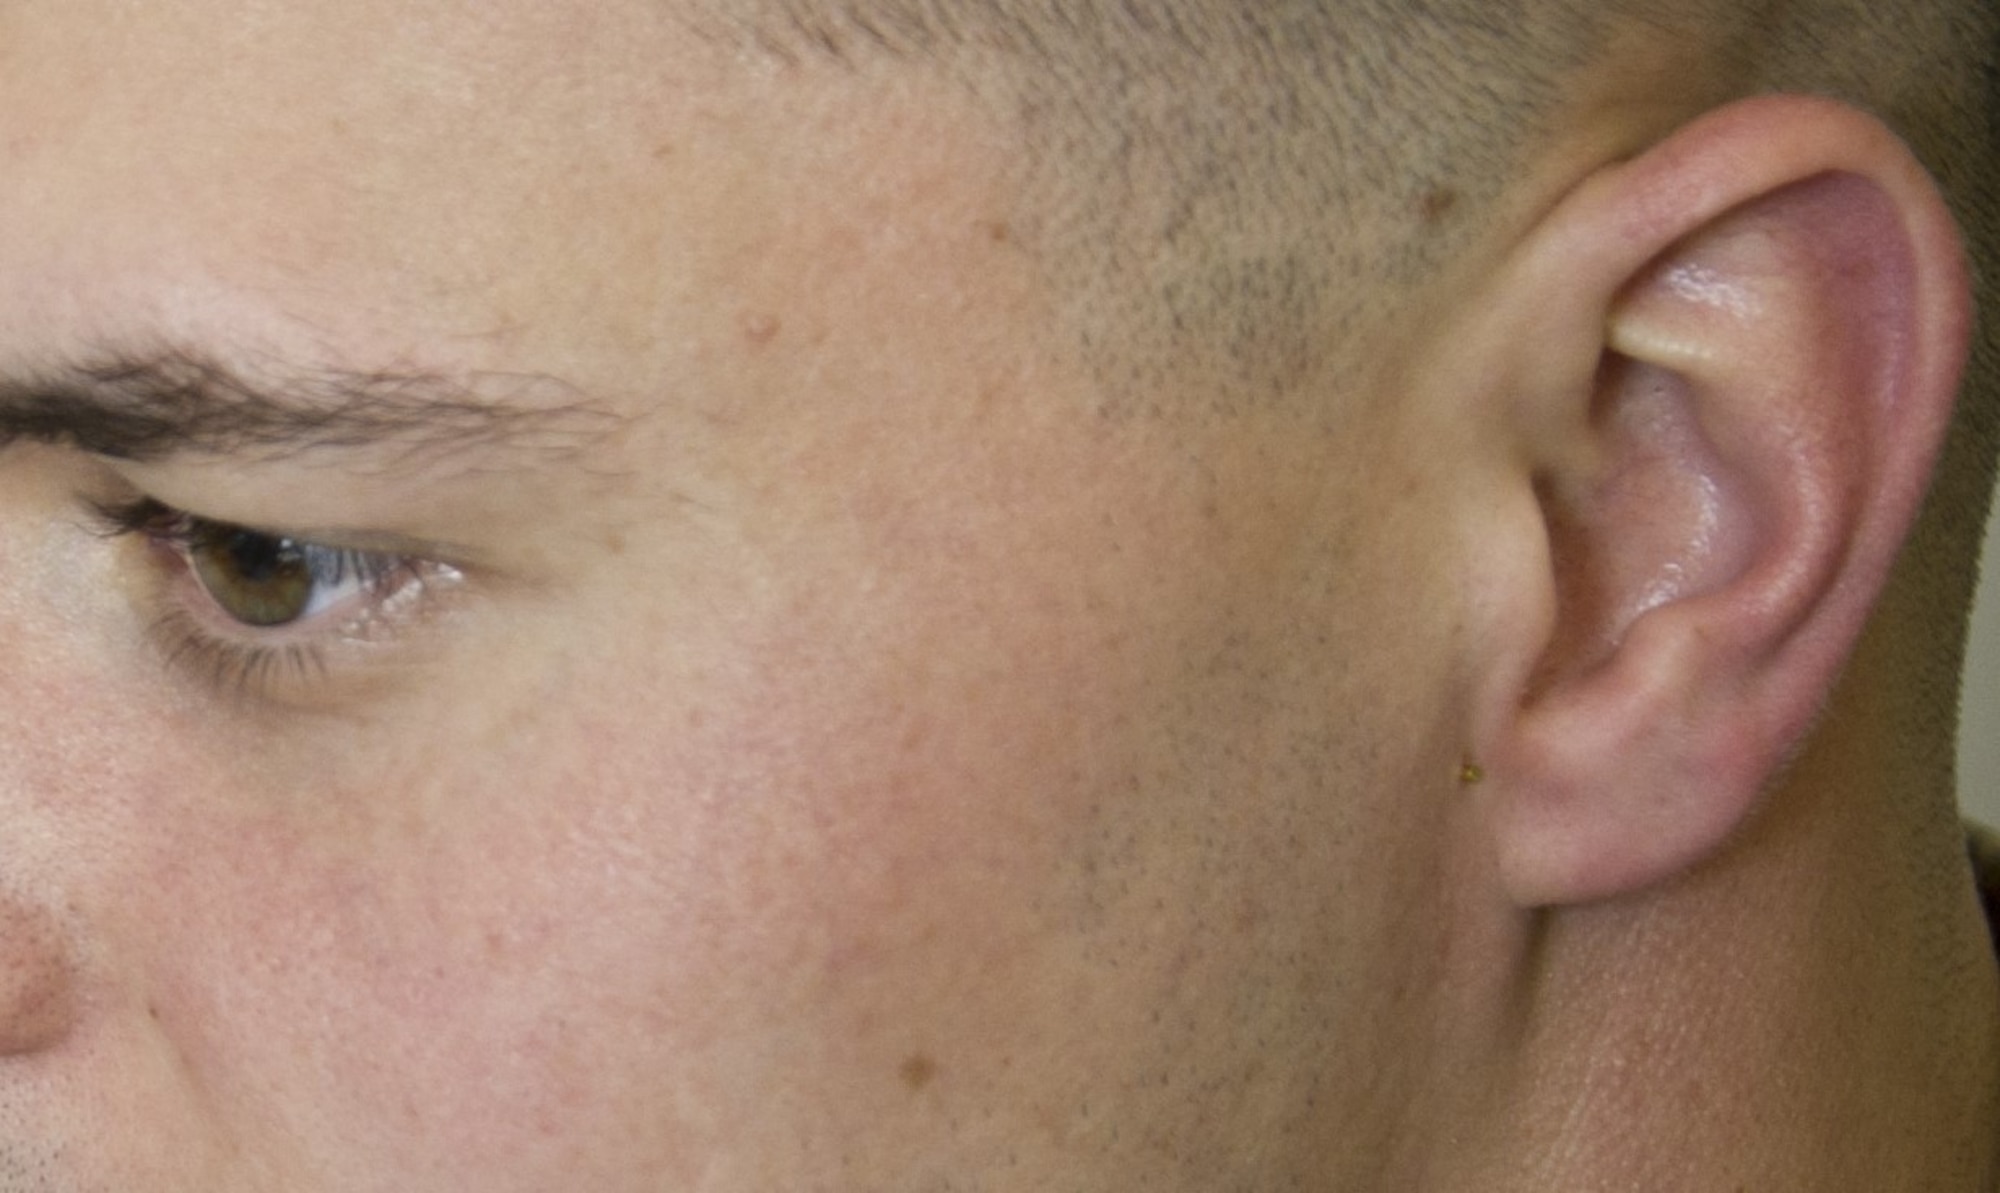 A semi-permanent acupuncture needle, or ASP, is inserted next to the ear of 2nd Lt. Paul Schroeder, a Uniformed Services University student working with the 779th Medical Group’s Air Force Acupuncture and Integrative Medicine Clinic staff March 28, 2017 at Joint Base Andrews, Md. Auricular therapy is one kind of acupuncture protocol that can be used on the battlefield because the placement of the ASPs can be learned by medical professionals who don’t specialize in acupuncture and the needles can remain in the ears from 3-5 days. Doing so, provides relief for patients suffering from some ailments such as anxiety, back pain, muscle stiffness and headaches. (U.S. Air Force photo by Staff Sgt. Joe Yanik)